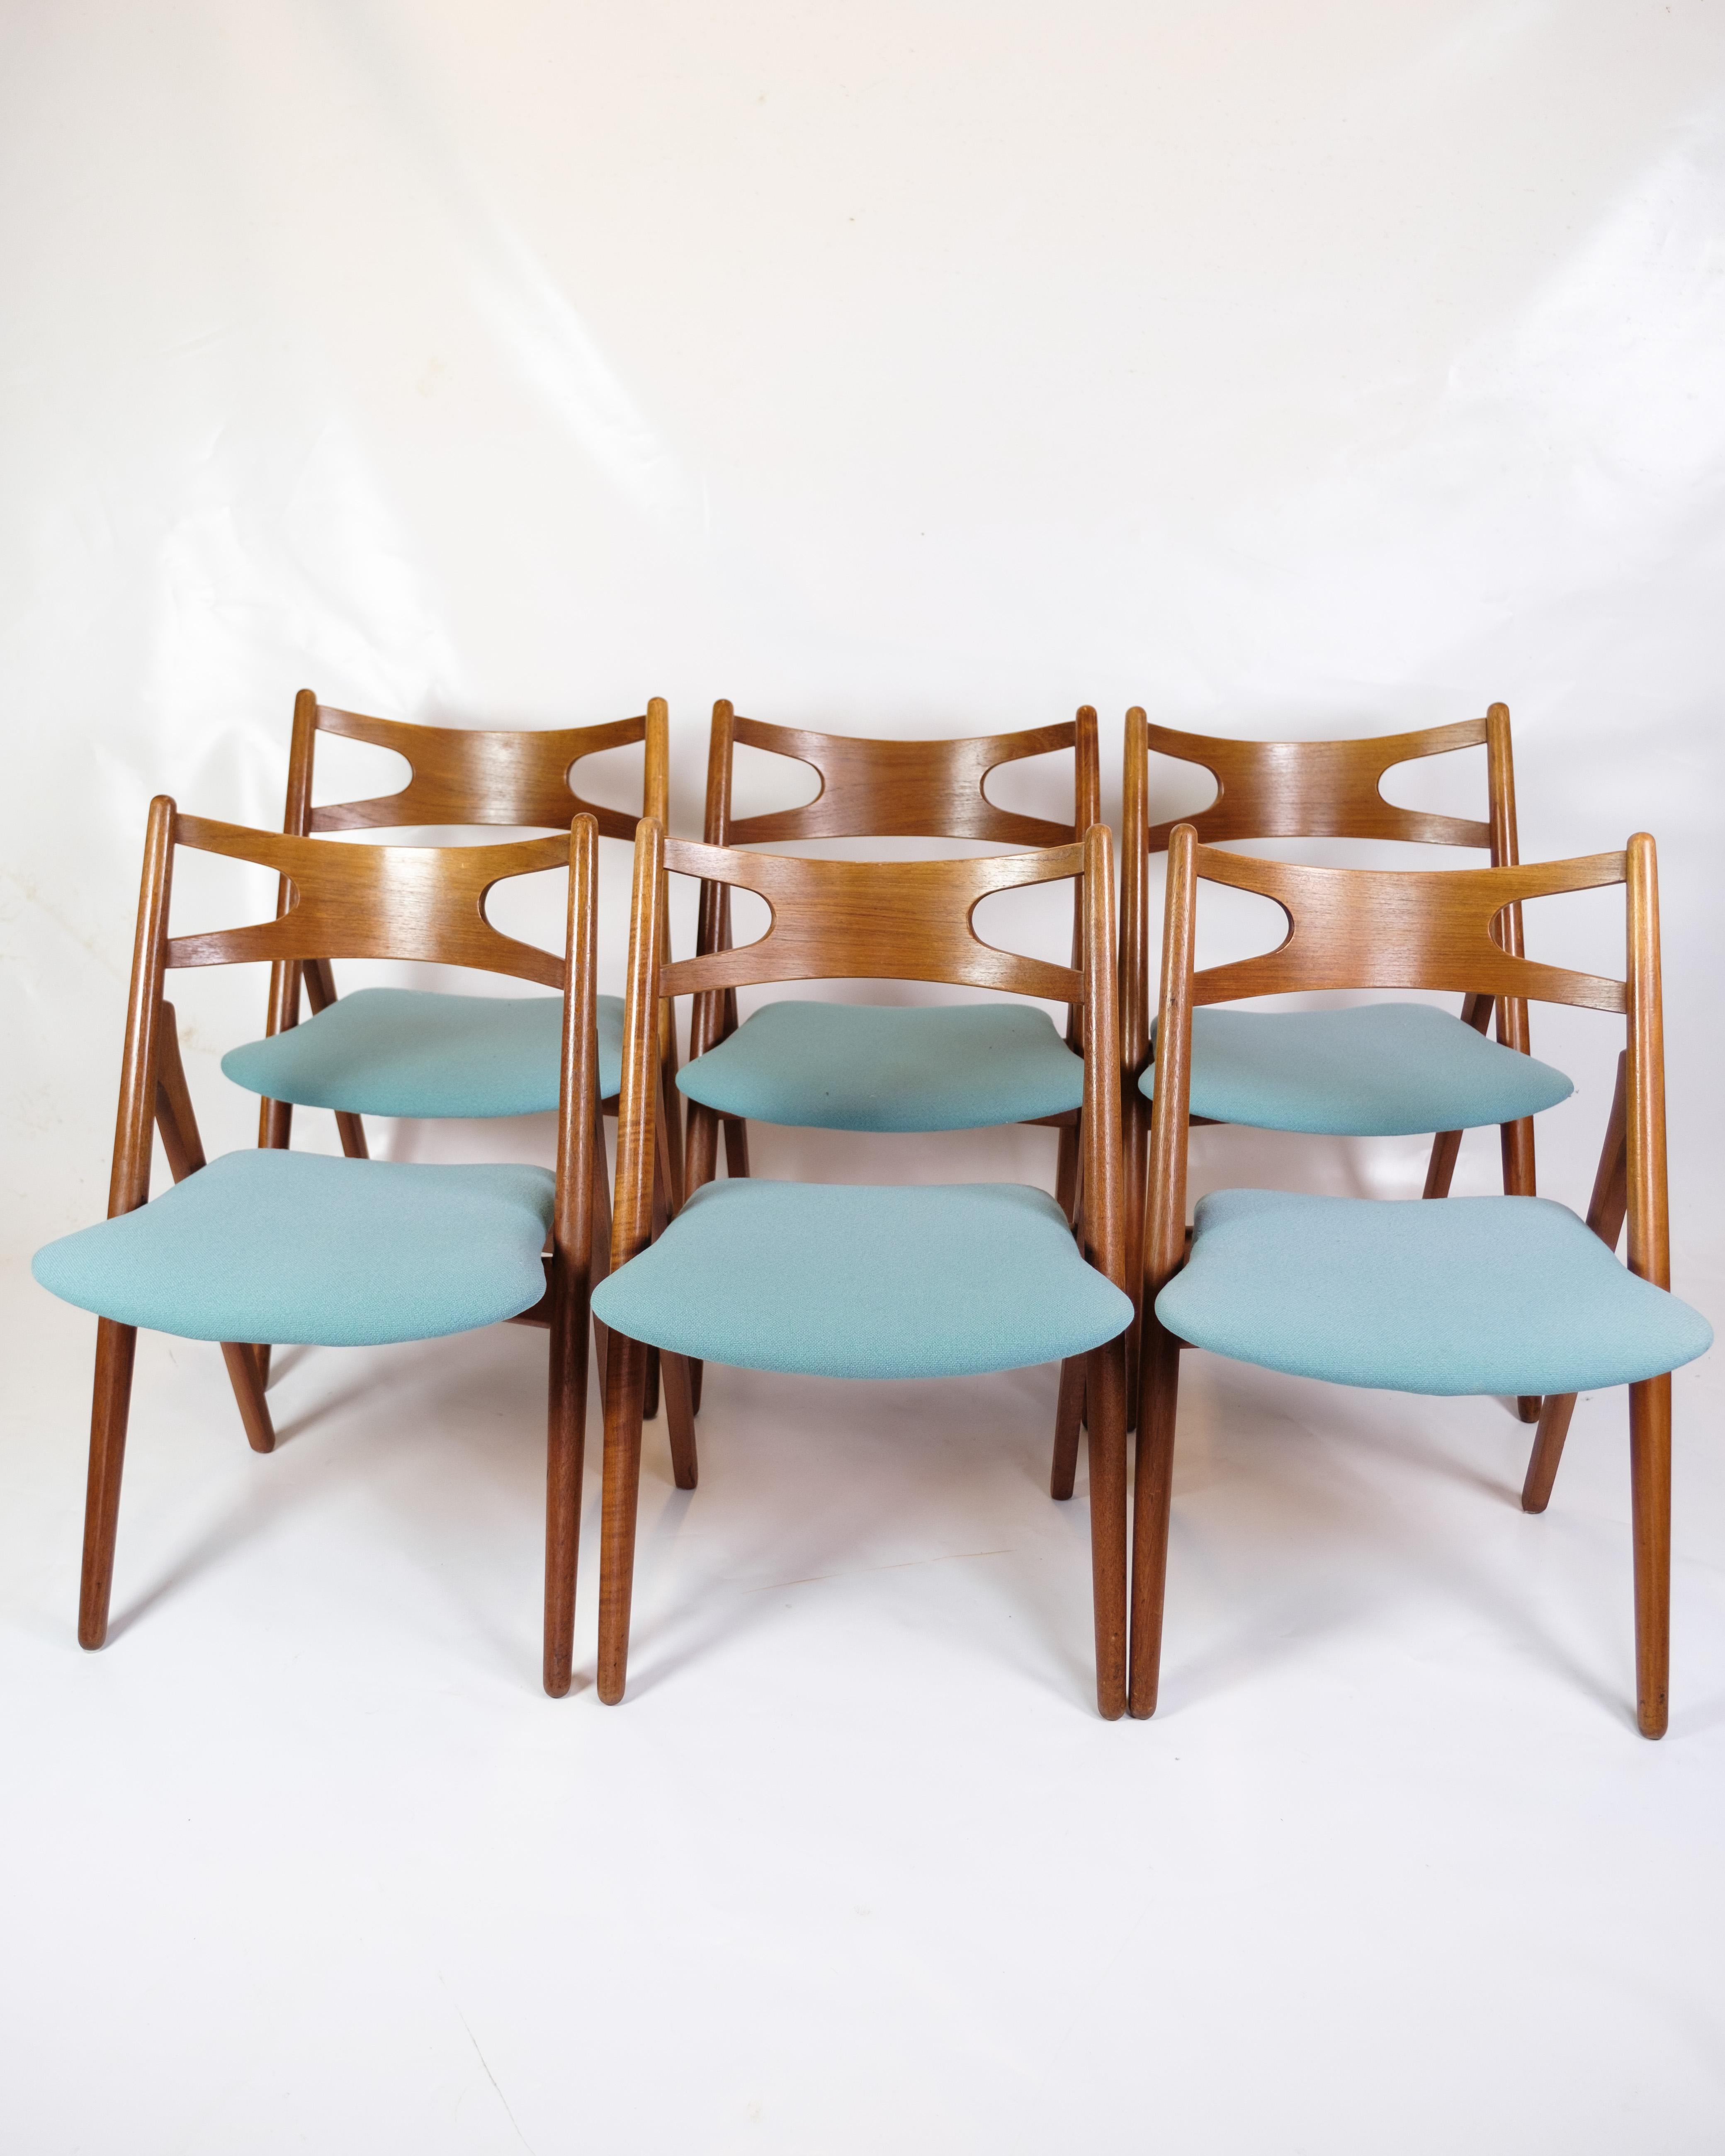 This set of six dining room chairs, model CH29P, is made of teak wood and has a timeless elegance that fits perfectly in any dining area. The chairs are carefully upholstered in light blue fabric that adds a pleasant contrast to the warm wood.

Hans